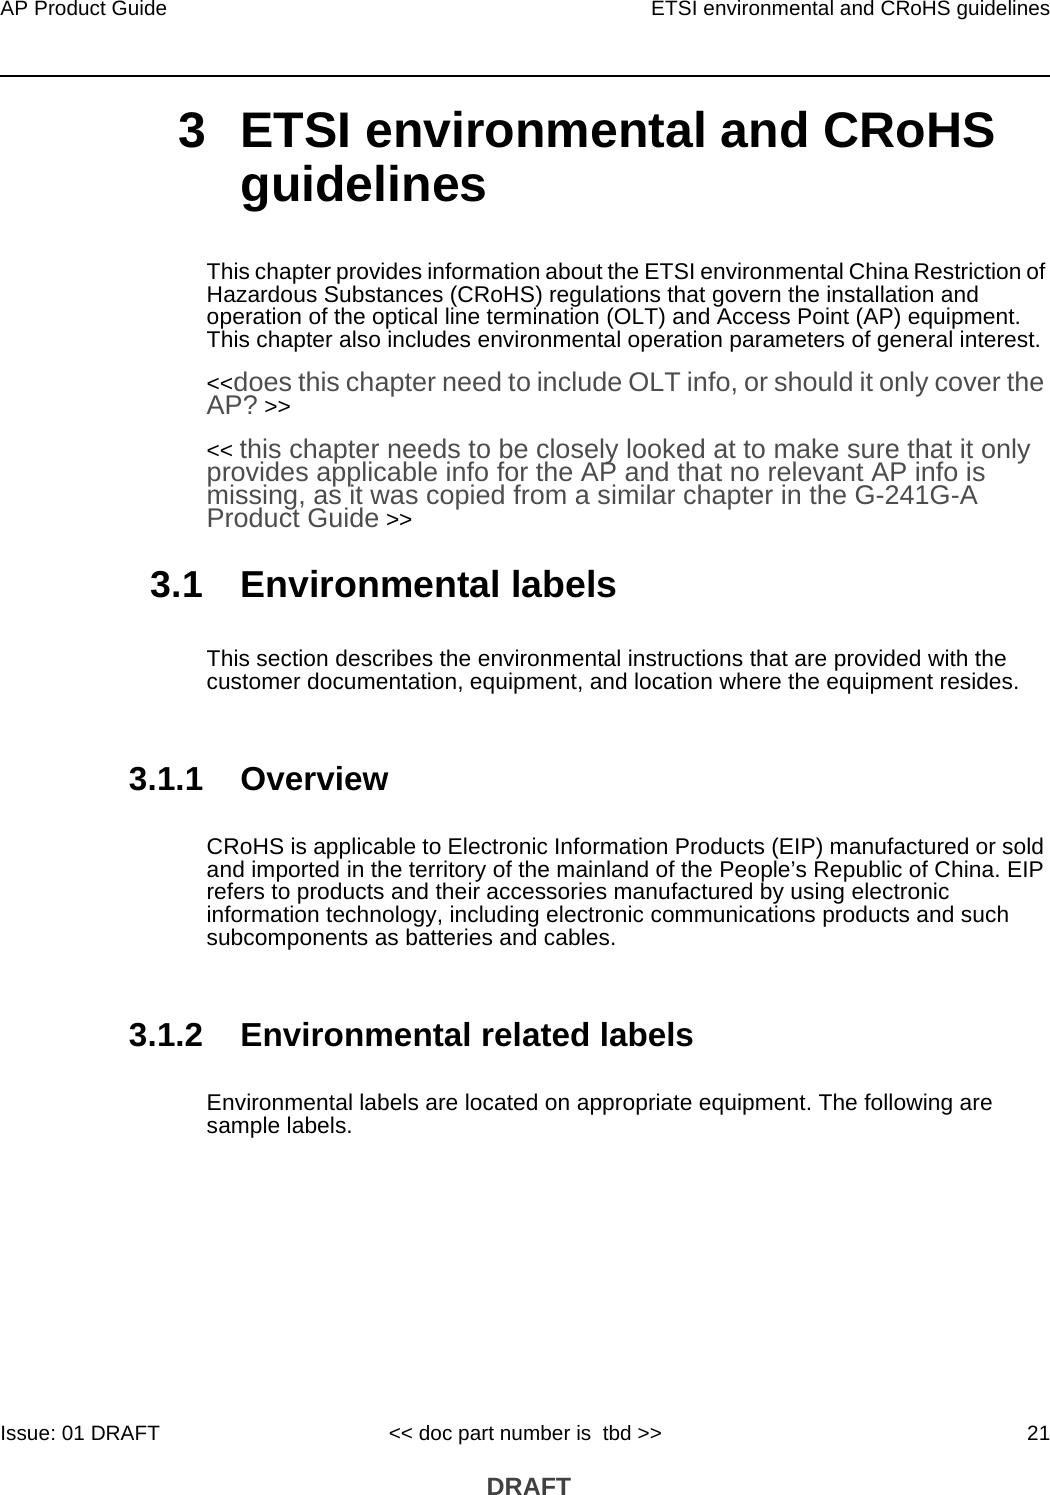 AP Product Guide ETSI environmental and CRoHS guidelinesIssue: 01 DRAFT &lt;&lt; doc part number is  tbd &gt;&gt; 21 DRAFT3 ETSI environmental and CRoHS guidelinesThis chapter provides information about the ETSI environmental China Restriction of Hazardous Substances (CRoHS) regulations that govern the installation and operation of the optical line termination (OLT) and Access Point (AP) equipment. This chapter also includes environmental operation parameters of general interest. &lt;&lt;does this chapter need to include OLT info, or should it only cover the AP? &gt;&gt;&lt;&lt; this chapter needs to be closely looked at to make sure that it only provides applicable info for the AP and that no relevant AP info is missing, as it was copied from a similar chapter in the G-241G-A Product Guide &gt;&gt; 3.1 Environmental labelsThis section describes the environmental instructions that are provided with the customer documentation, equipment, and location where the equipment resides.3.1.1 OverviewCRoHS is applicable to Electronic Information Products (EIP) manufactured or sold and imported in the territory of the mainland of the People’s Republic of China. EIP refers to products and their accessories manufactured by using electronic information technology, including electronic communications products and such subcomponents as batteries and cables.3.1.2 Environmental related labelsEnvironmental labels are located on appropriate equipment. The following are sample labels.